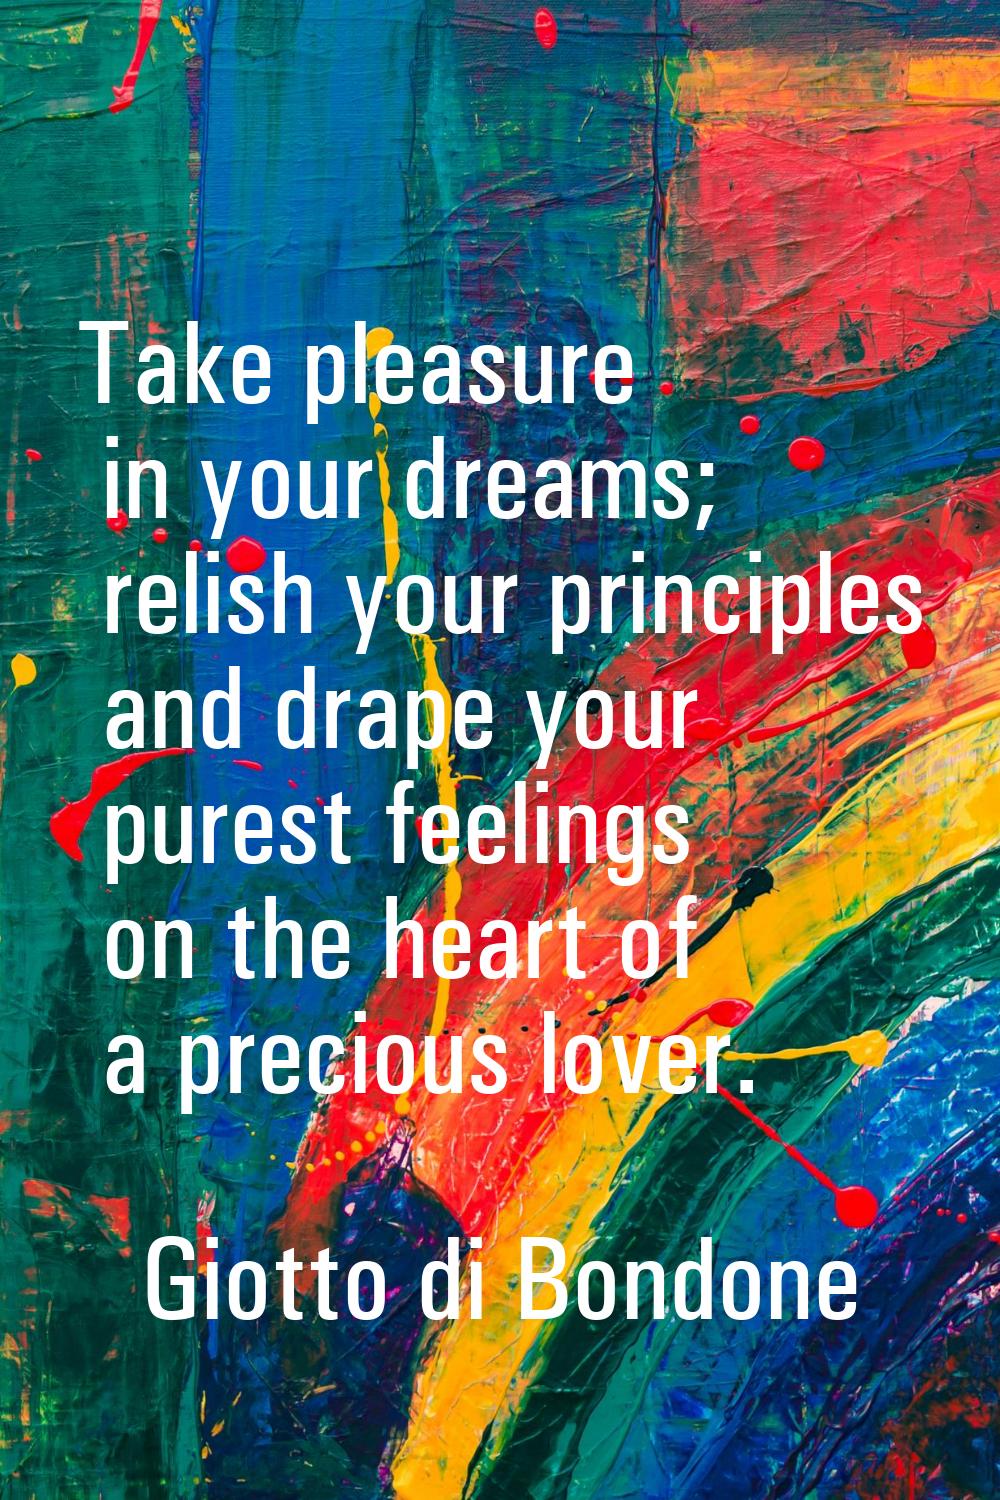 Take pleasure in your dreams; relish your principles and drape your purest feelings on the heart of